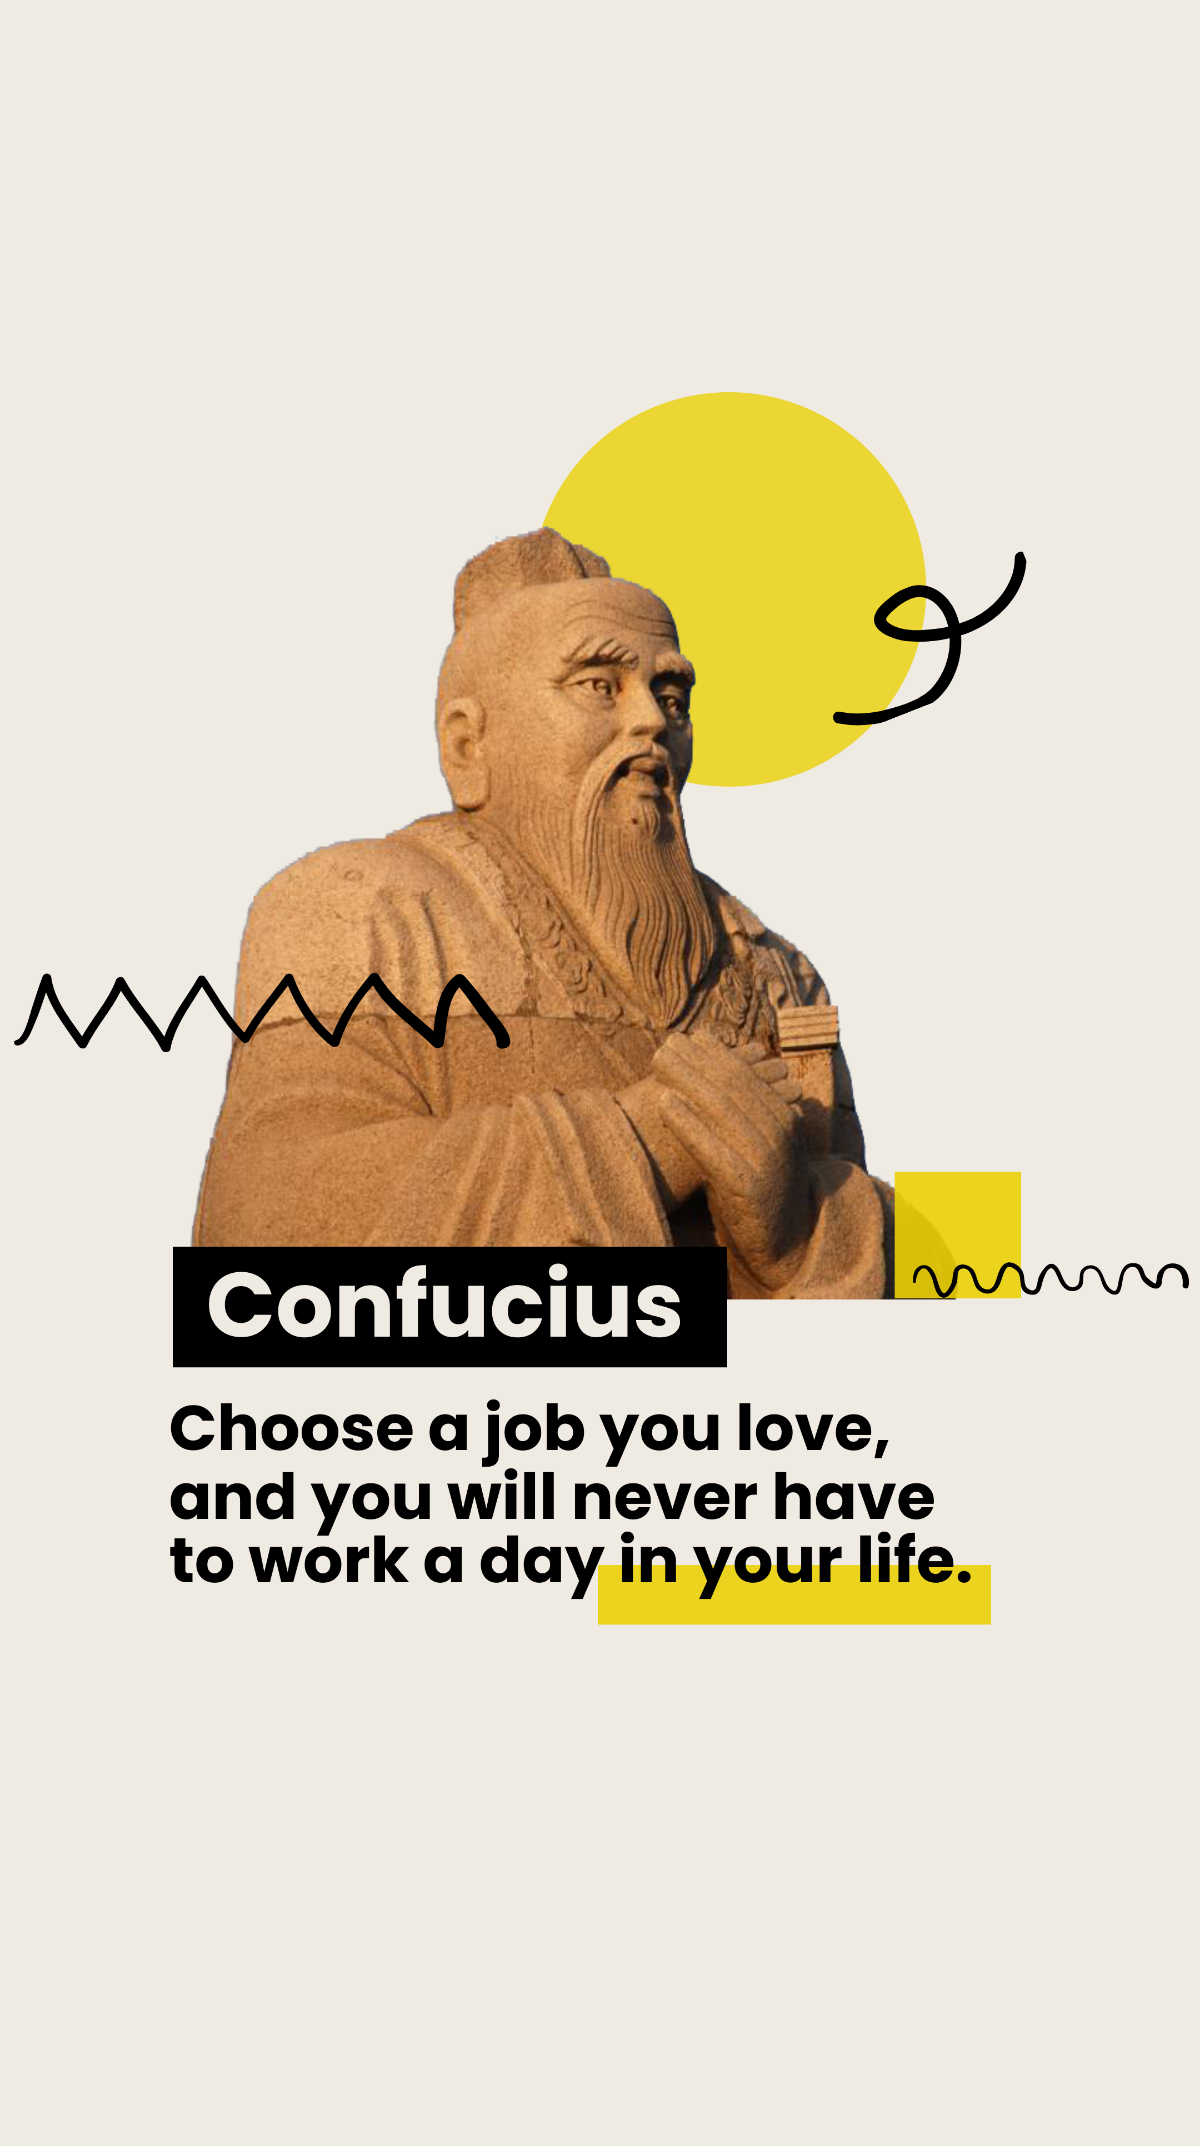 Confucius - Choose a job you love, and you will never have to work a day in your life.   Template